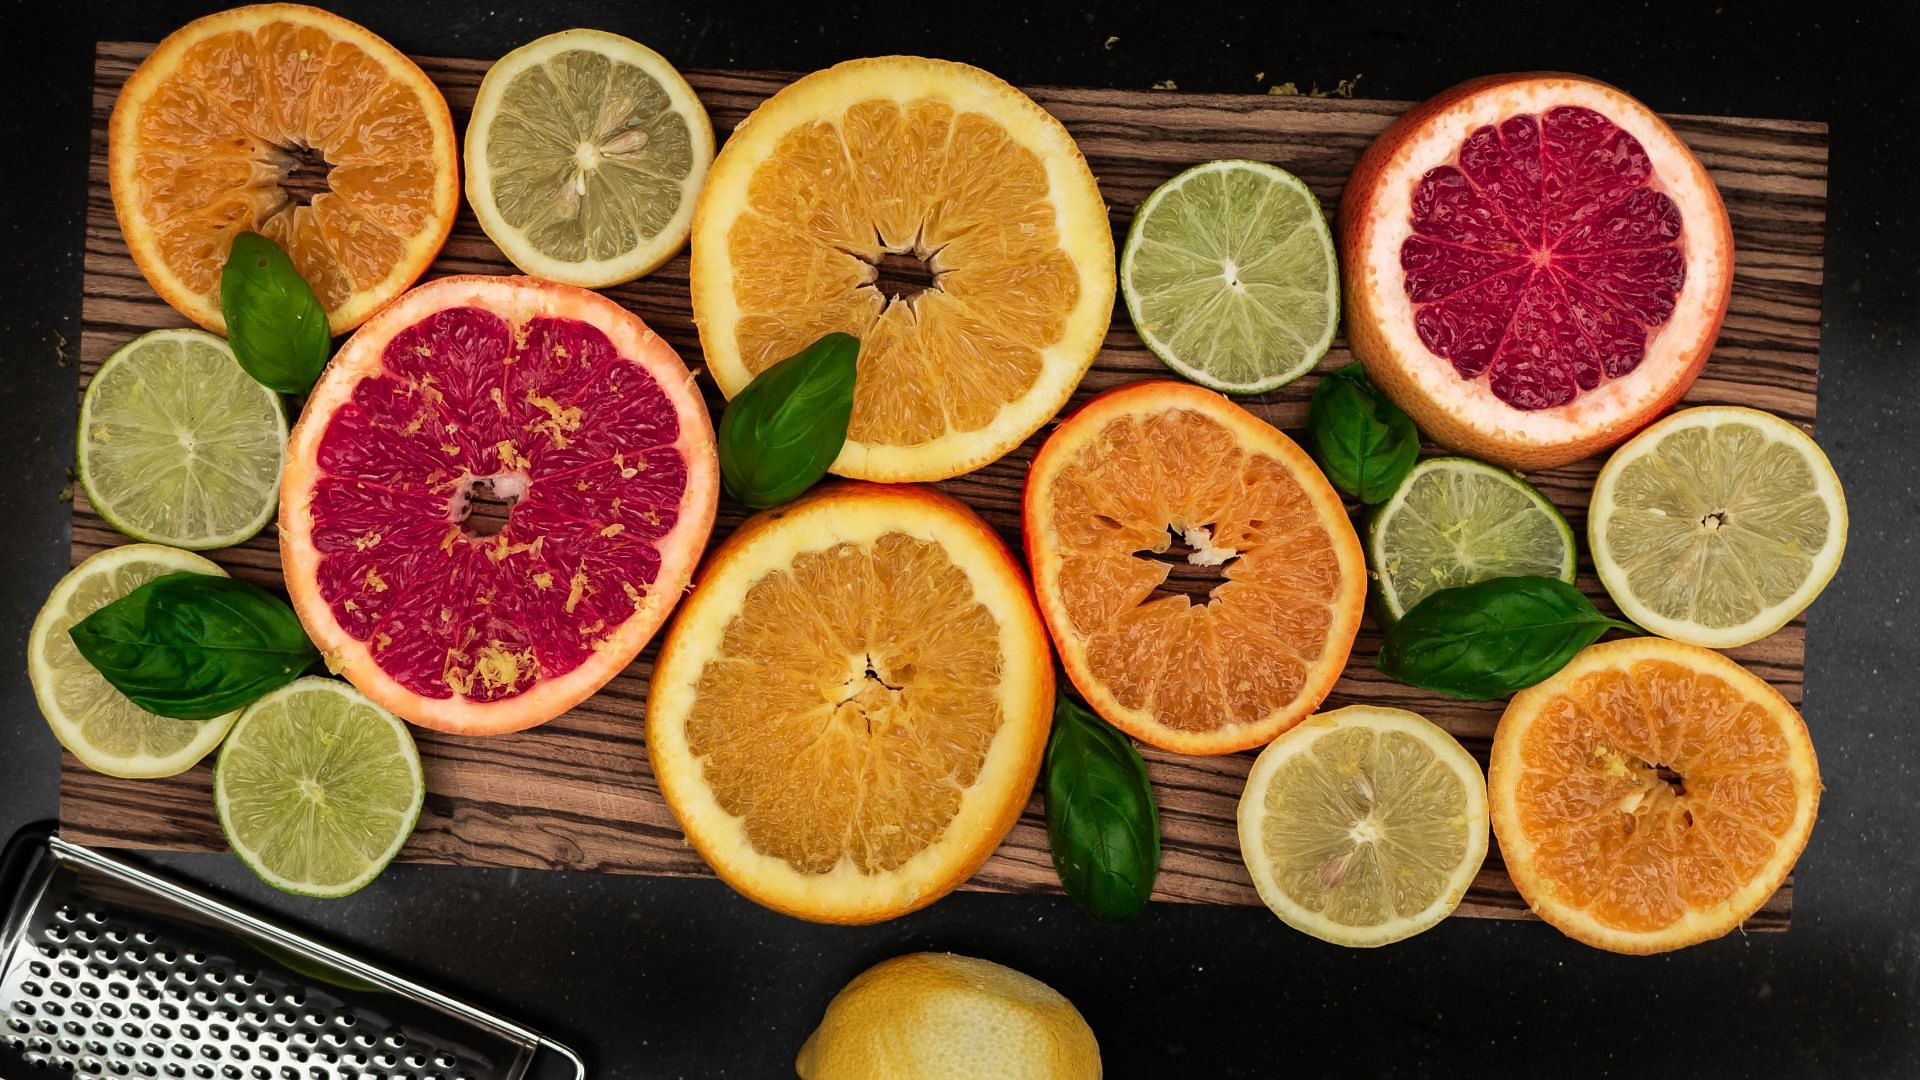 A diet high in vitamin C is a crucial component of a healthy lifestyle and the prevention of disease. (Image via Unsplash/Wouter Meijering)